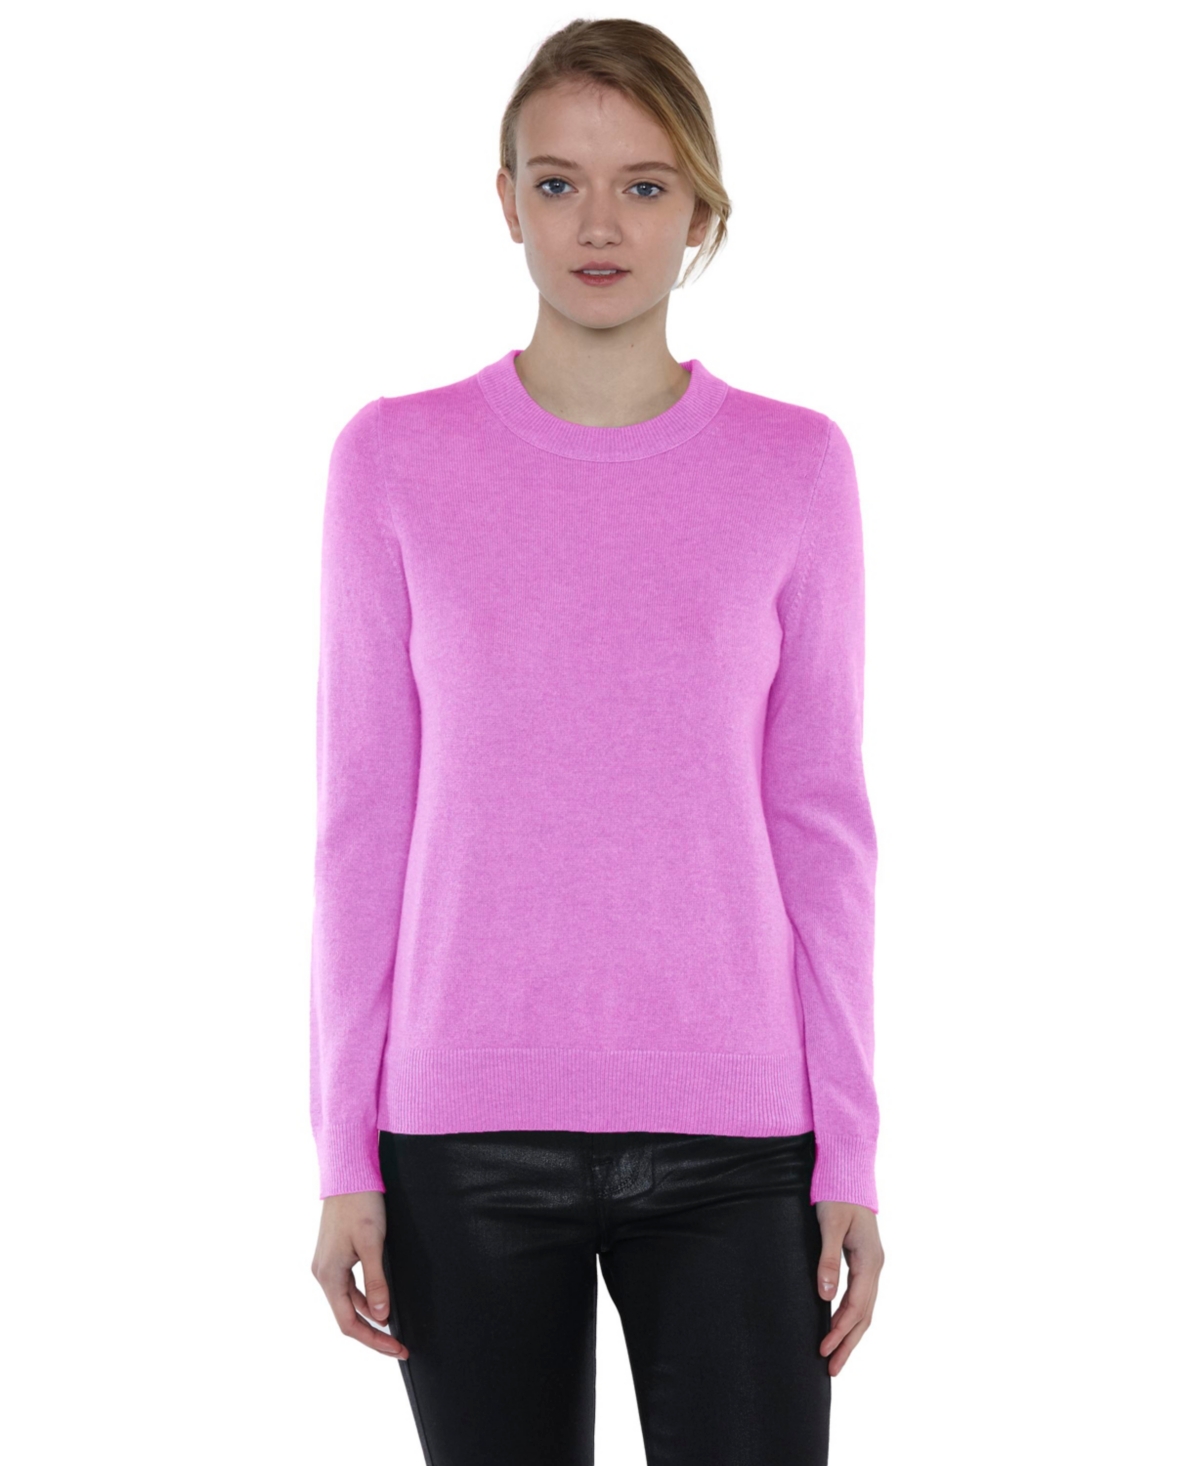 Women's 100% Pure Cashmere Long Sleeve Crew Neck Pullover Sweater (1362, Lime, X-Small ) - Orchid